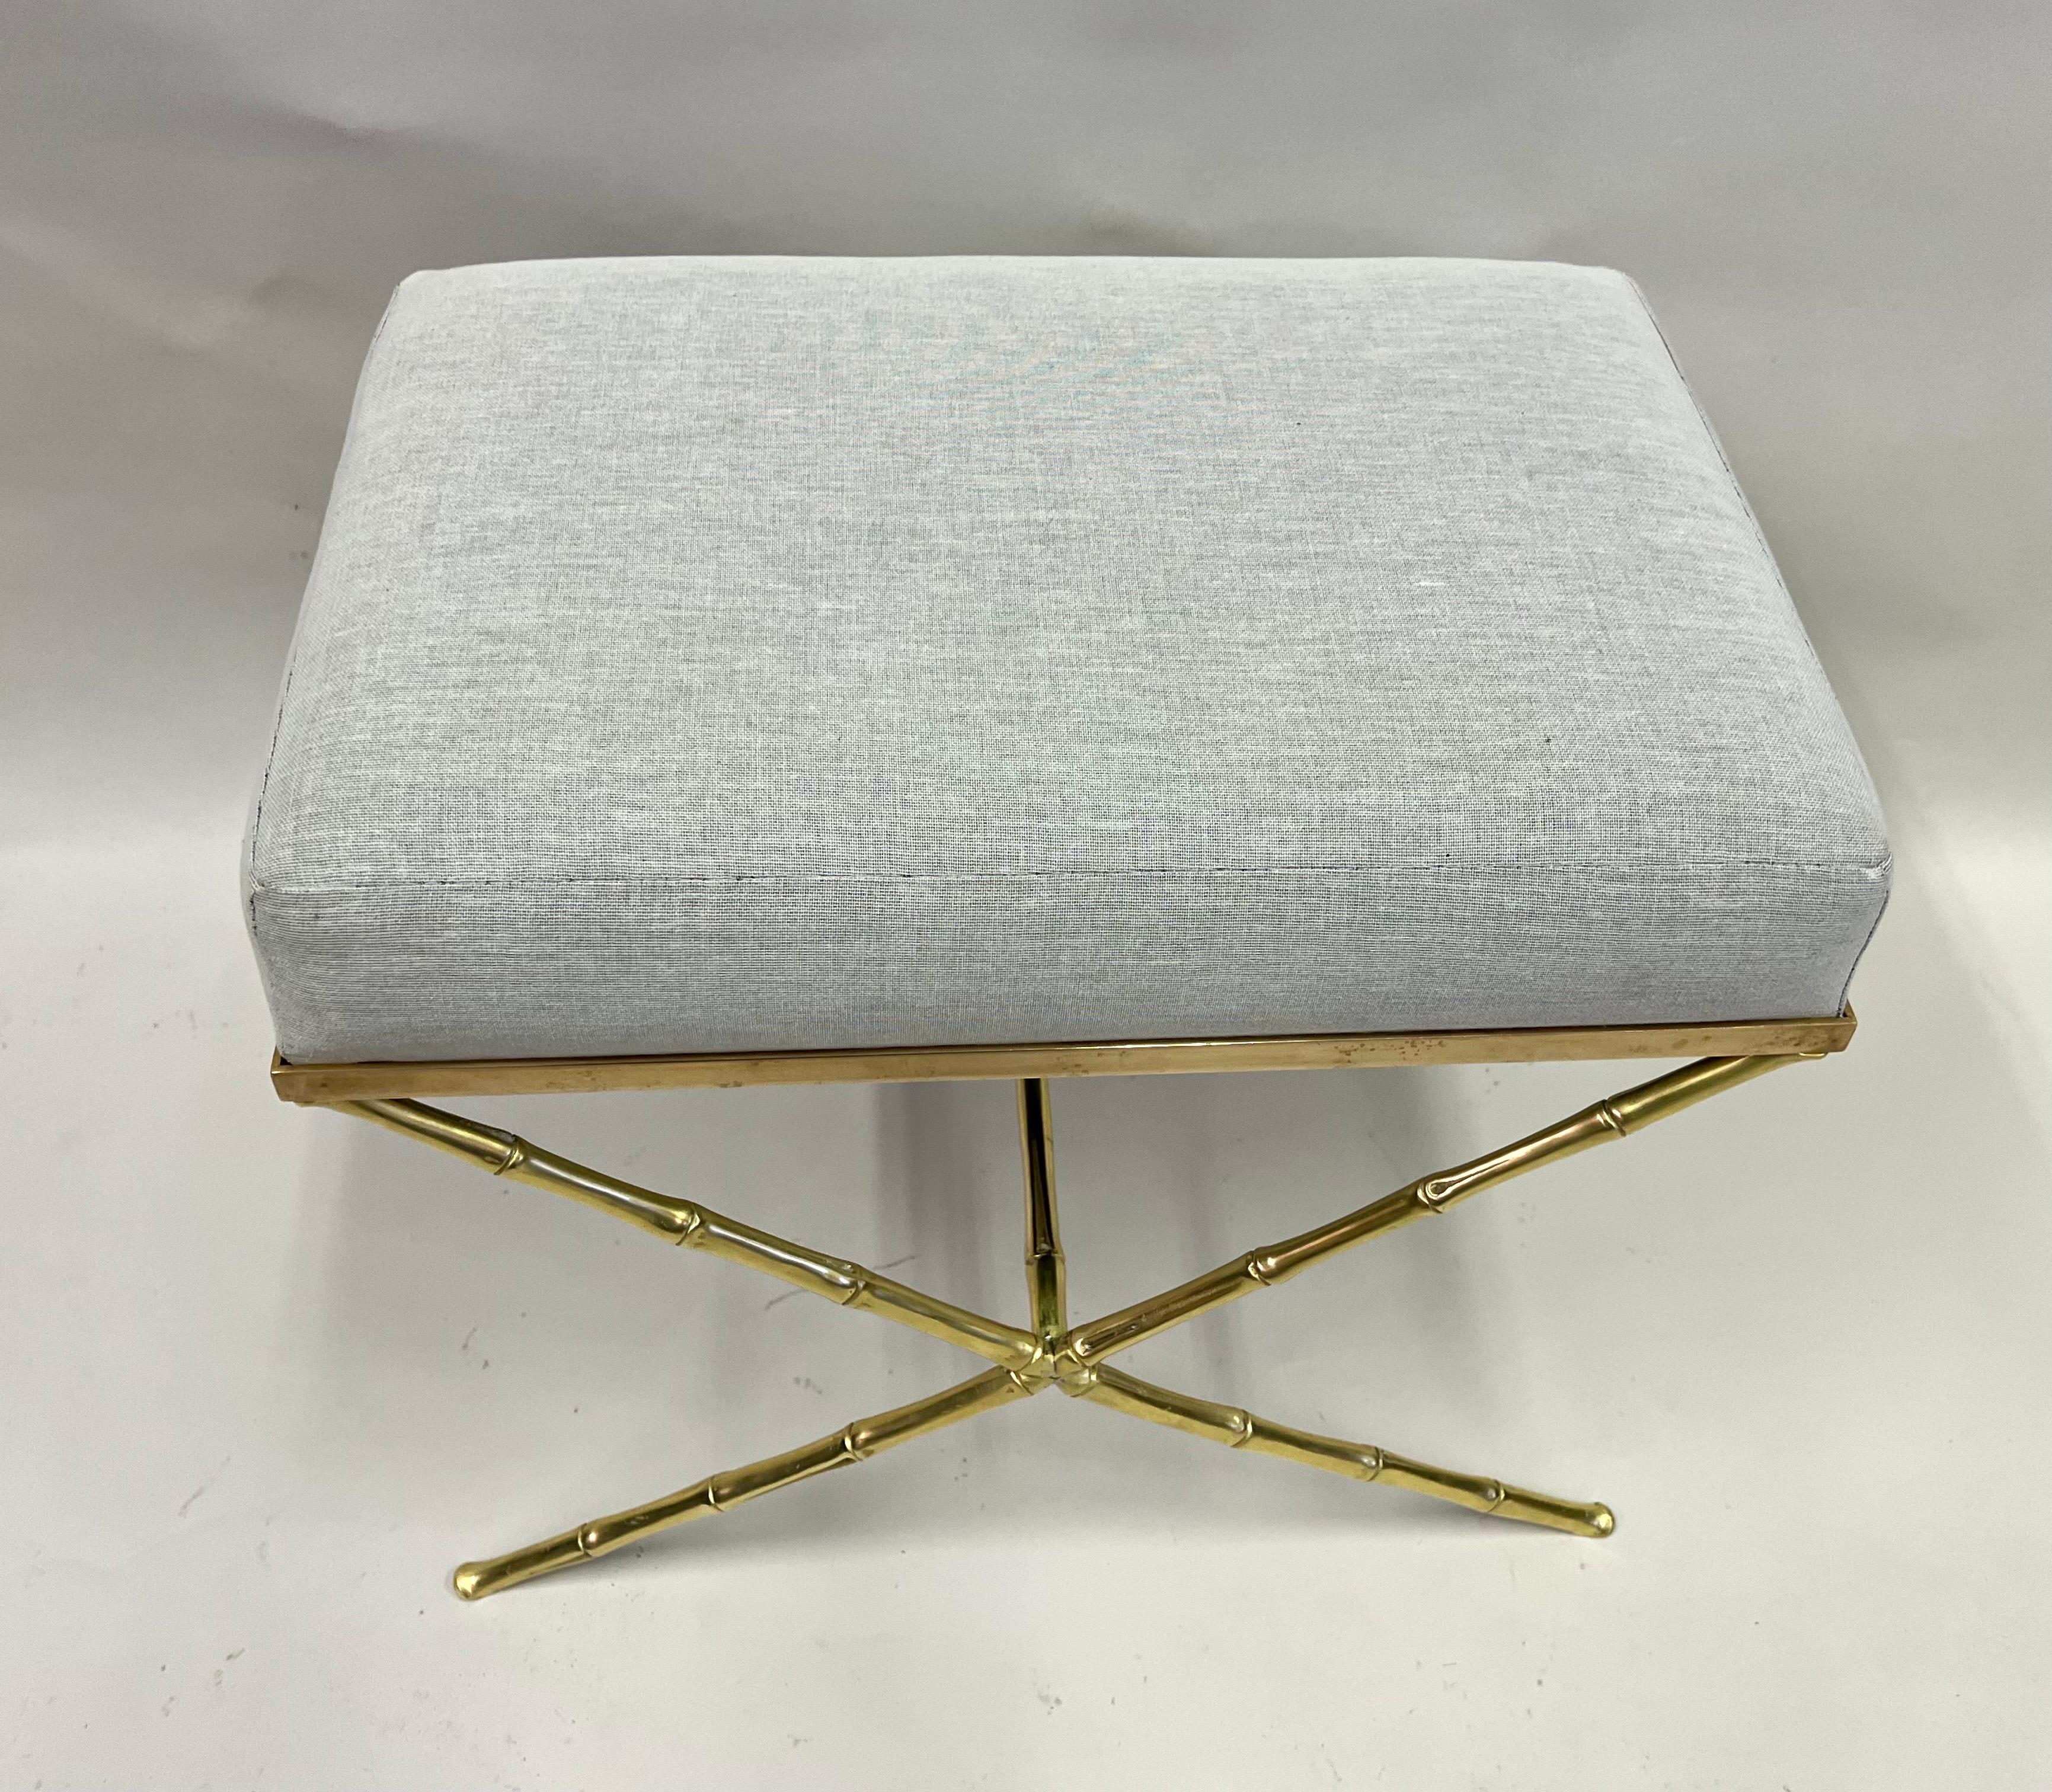 French Mid-Century Modern Neoclassical Brass Faux Bamboo Bench by Maison Baguès For Sale 4